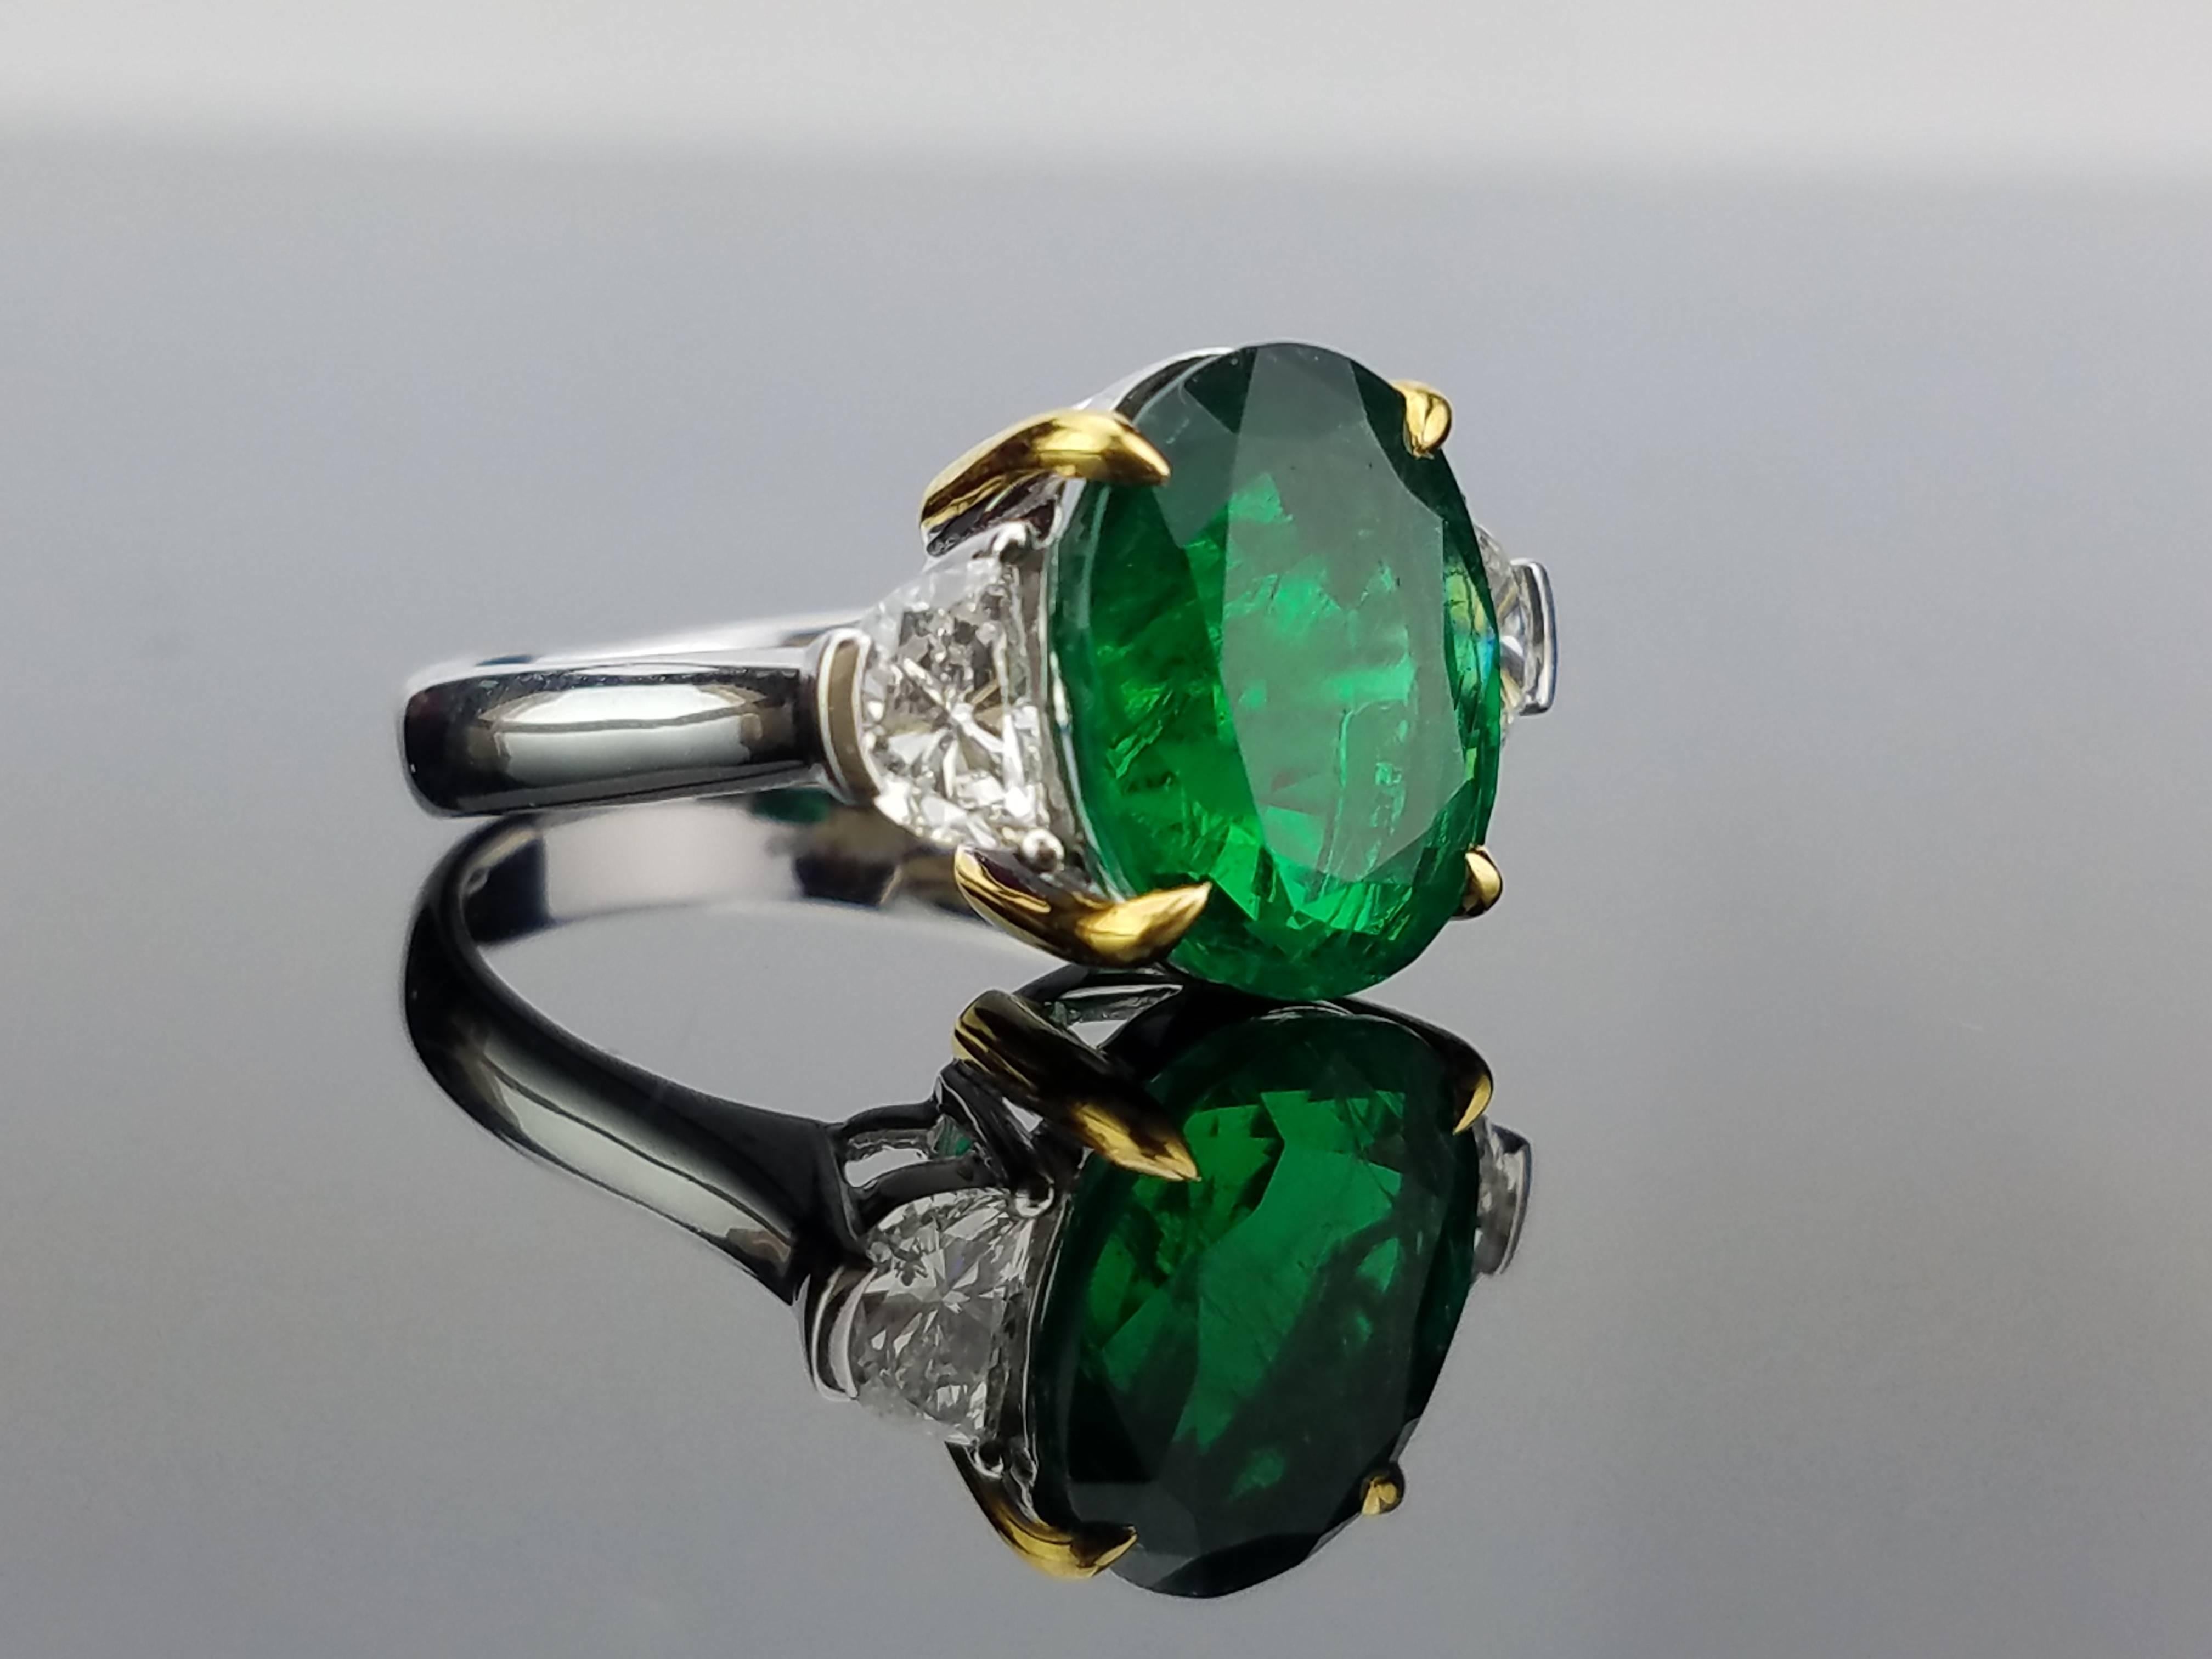 An elegant three stone ring using a beautiful oval shaped emerald centre stone and 2 half-moon white Diamond, all set in 18K white gold. 

Stone Details: 
Stone: Emerald
Carat Weight: 4.90

Diamond Details: 
Total Carat Weight: 0.81 carat
Quality: